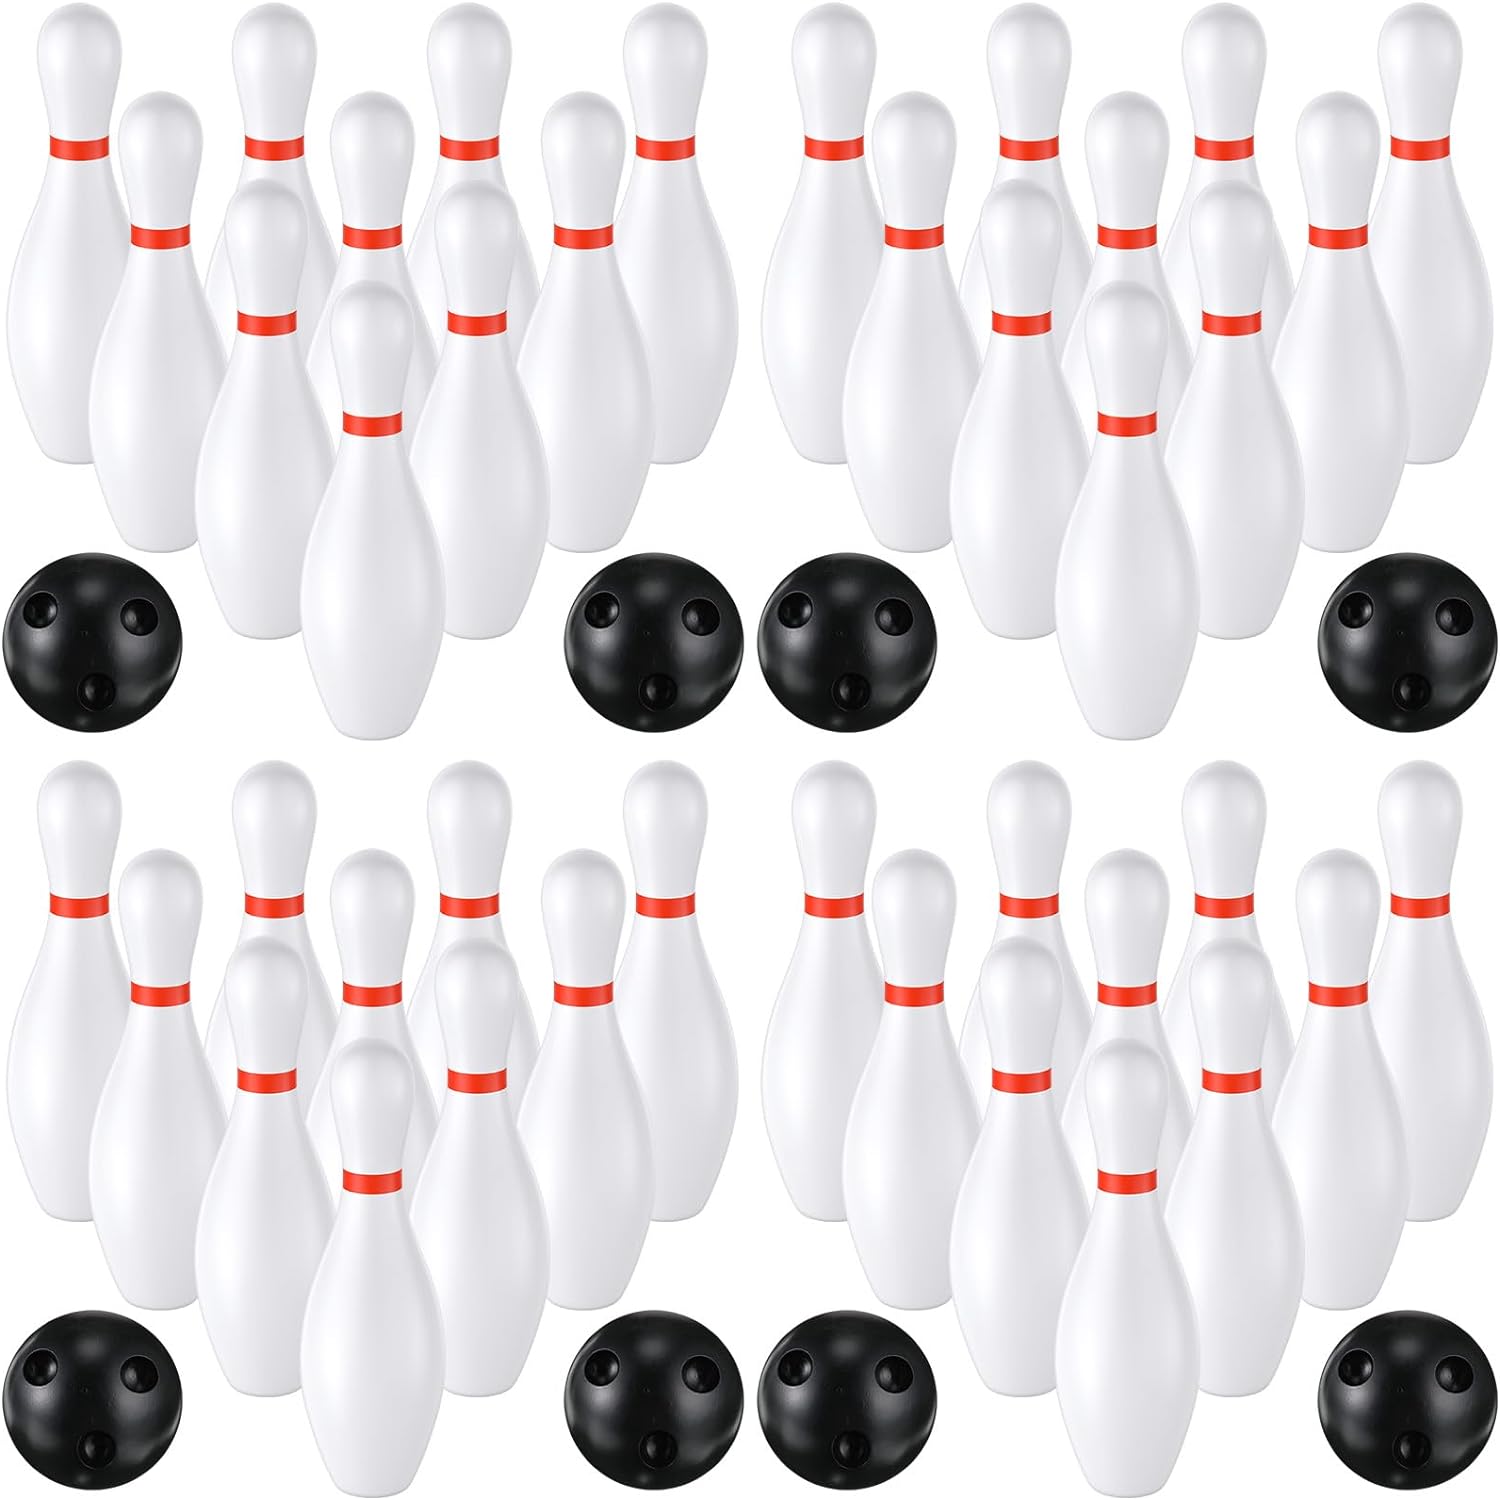 RoundFunny 4 Pack Kids Bowling Set Indoor and Outdoor Games for Kid Includes 40 Pcs 6.3 Inch Plastic Bowling Pins and 8 Pcs Balls Lawn Games for Toddler and Kids Yard School Activities Party